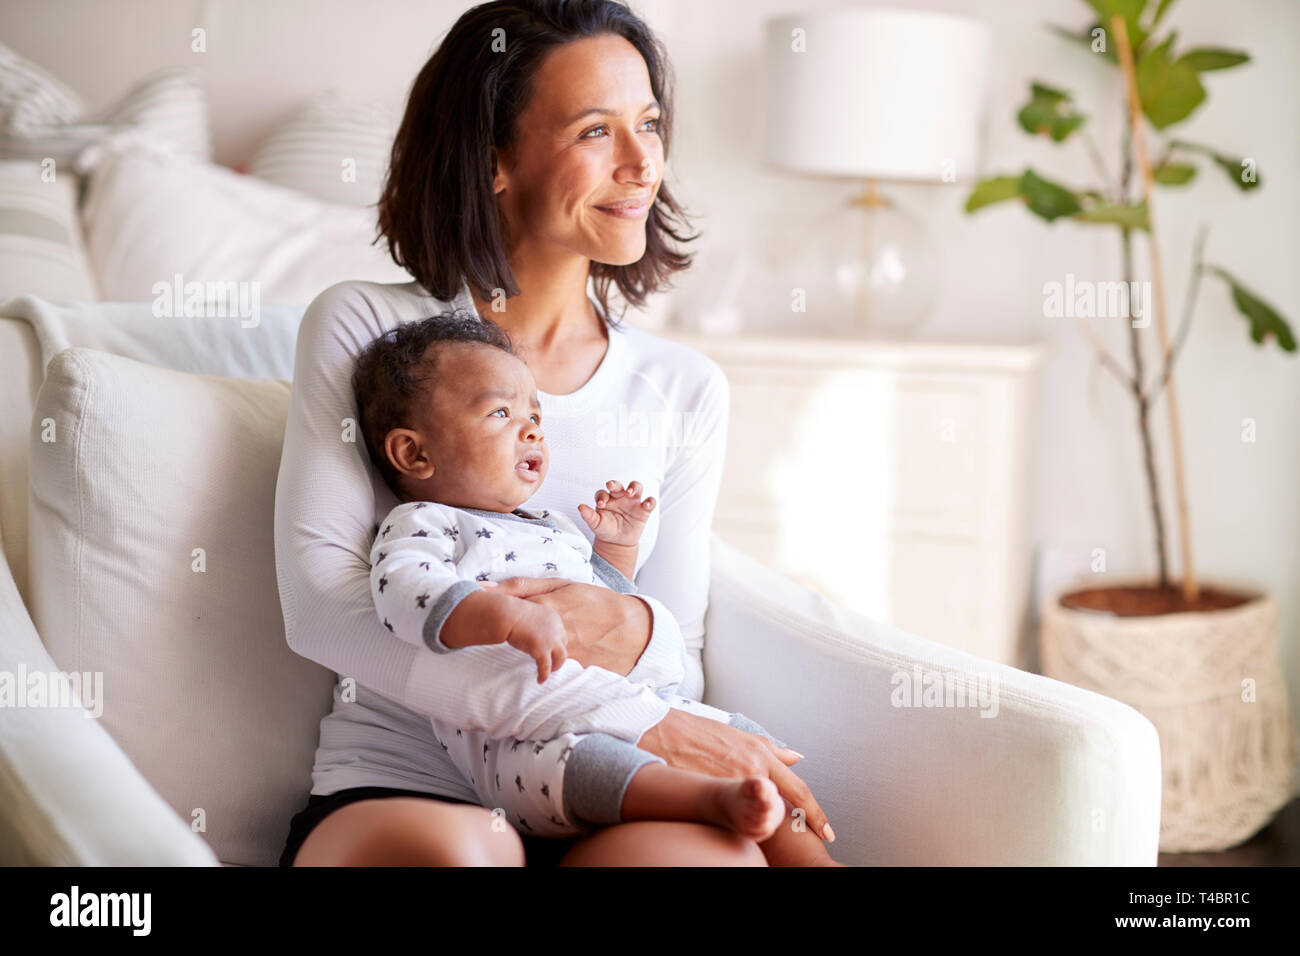 Young adult mother sitting in an armchair in her bedroom, holding her three month old baby son in her arms and looking away smiling, close up Stock Photo